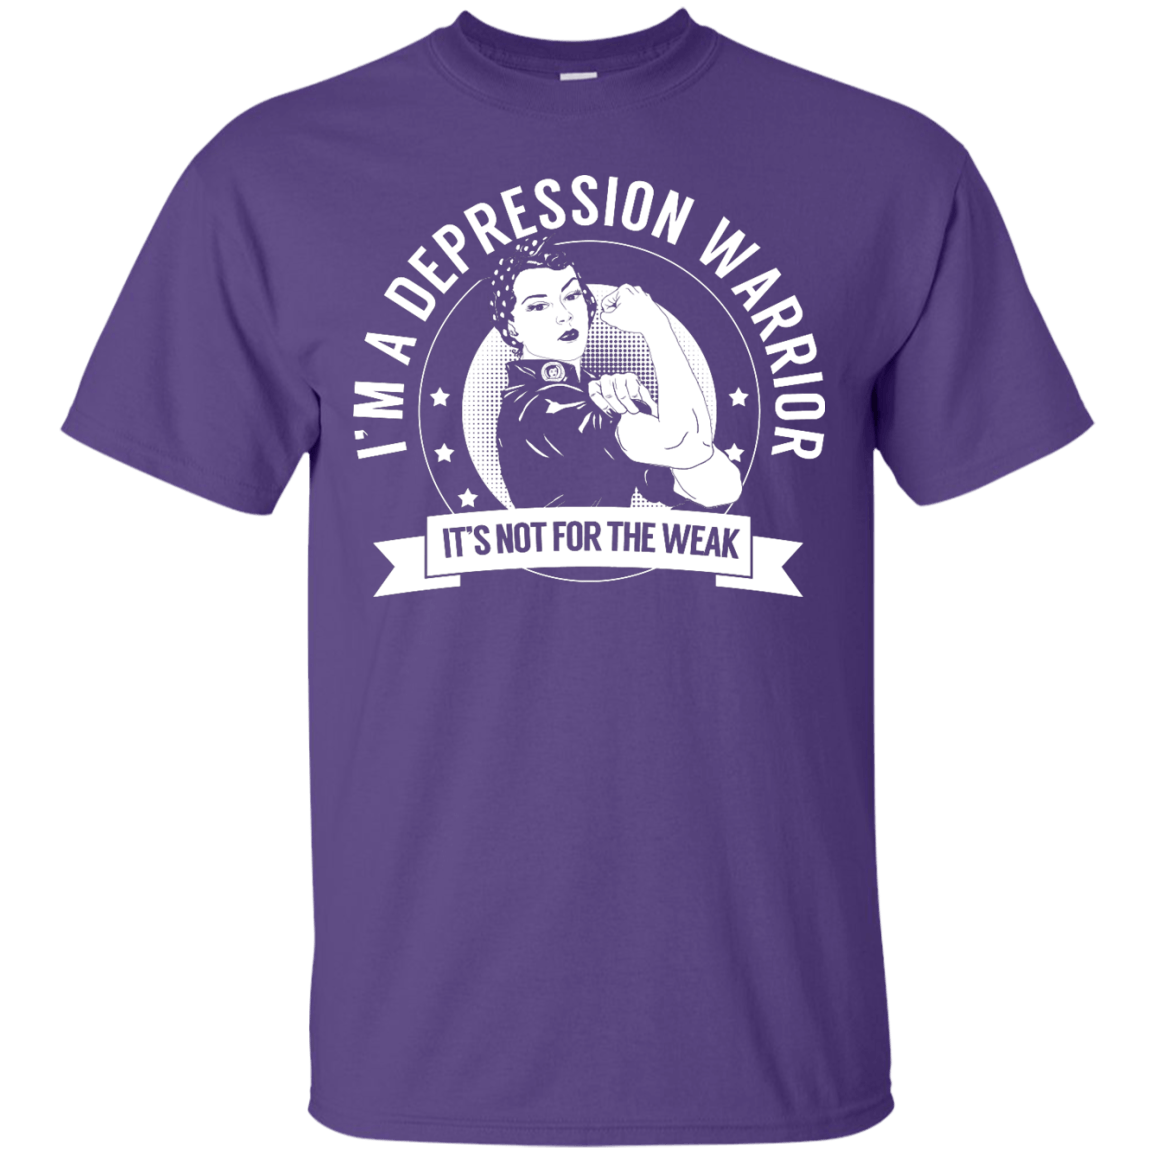 Depression Warrior Not for the Weak Unisex Shirt - The Unchargeables